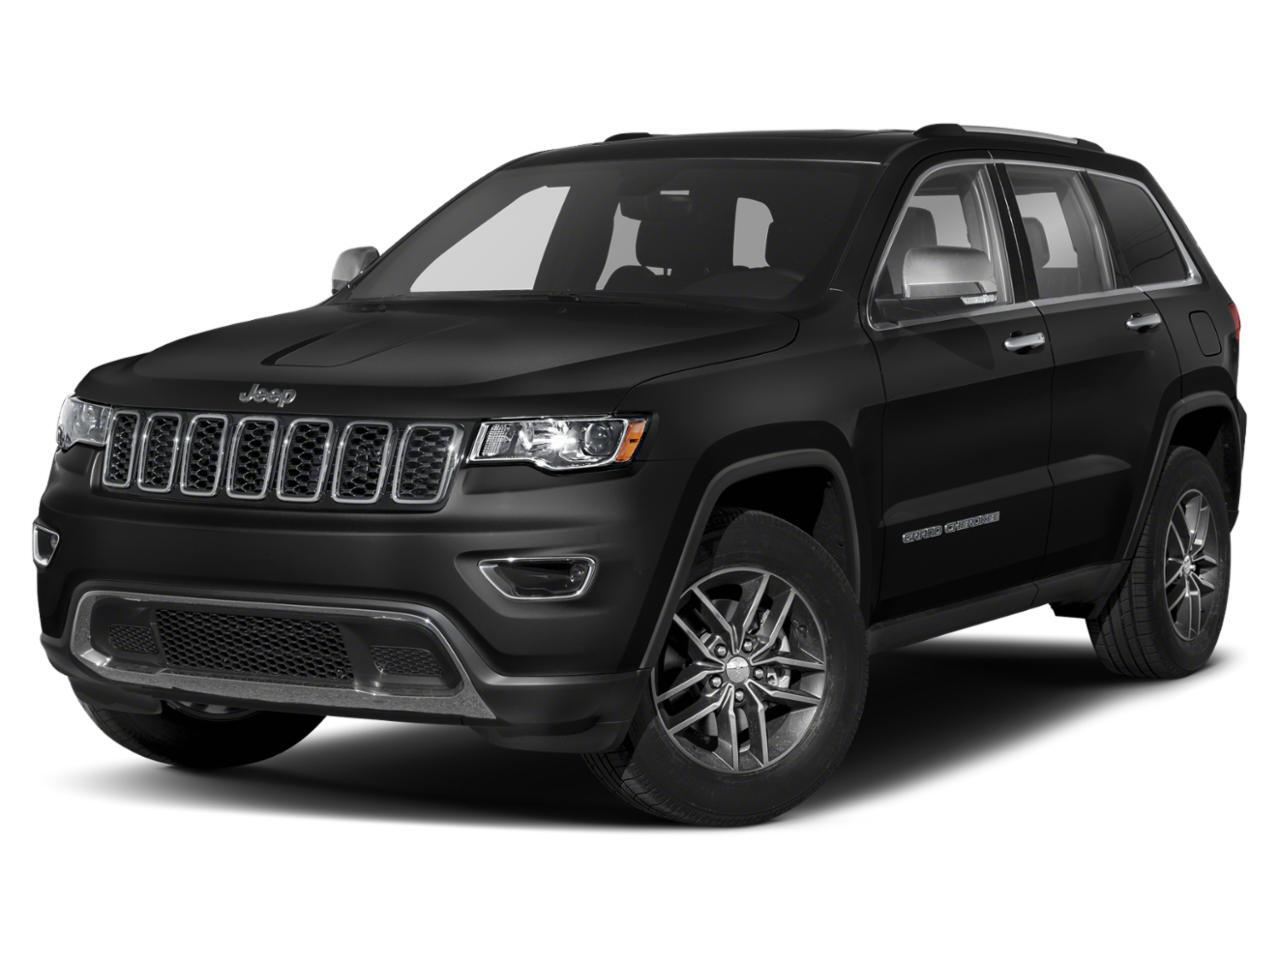 2019 Jeep Grand Cherokee LIMITED X IN DIAMOND BLACK EQUIPPED WITH A 5.7L HE